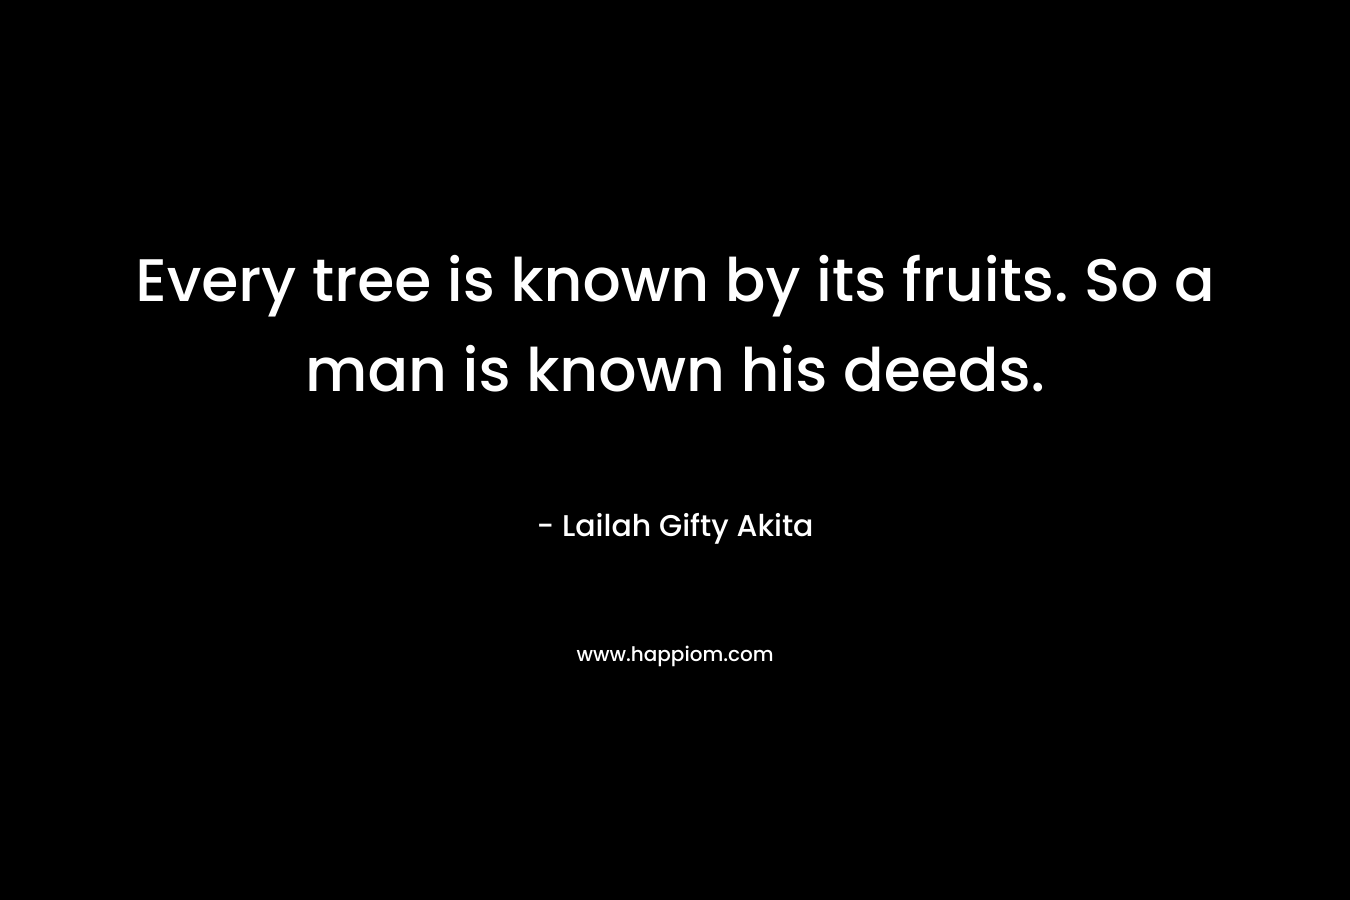 Every tree is known by its fruits. So a man is known his deeds.